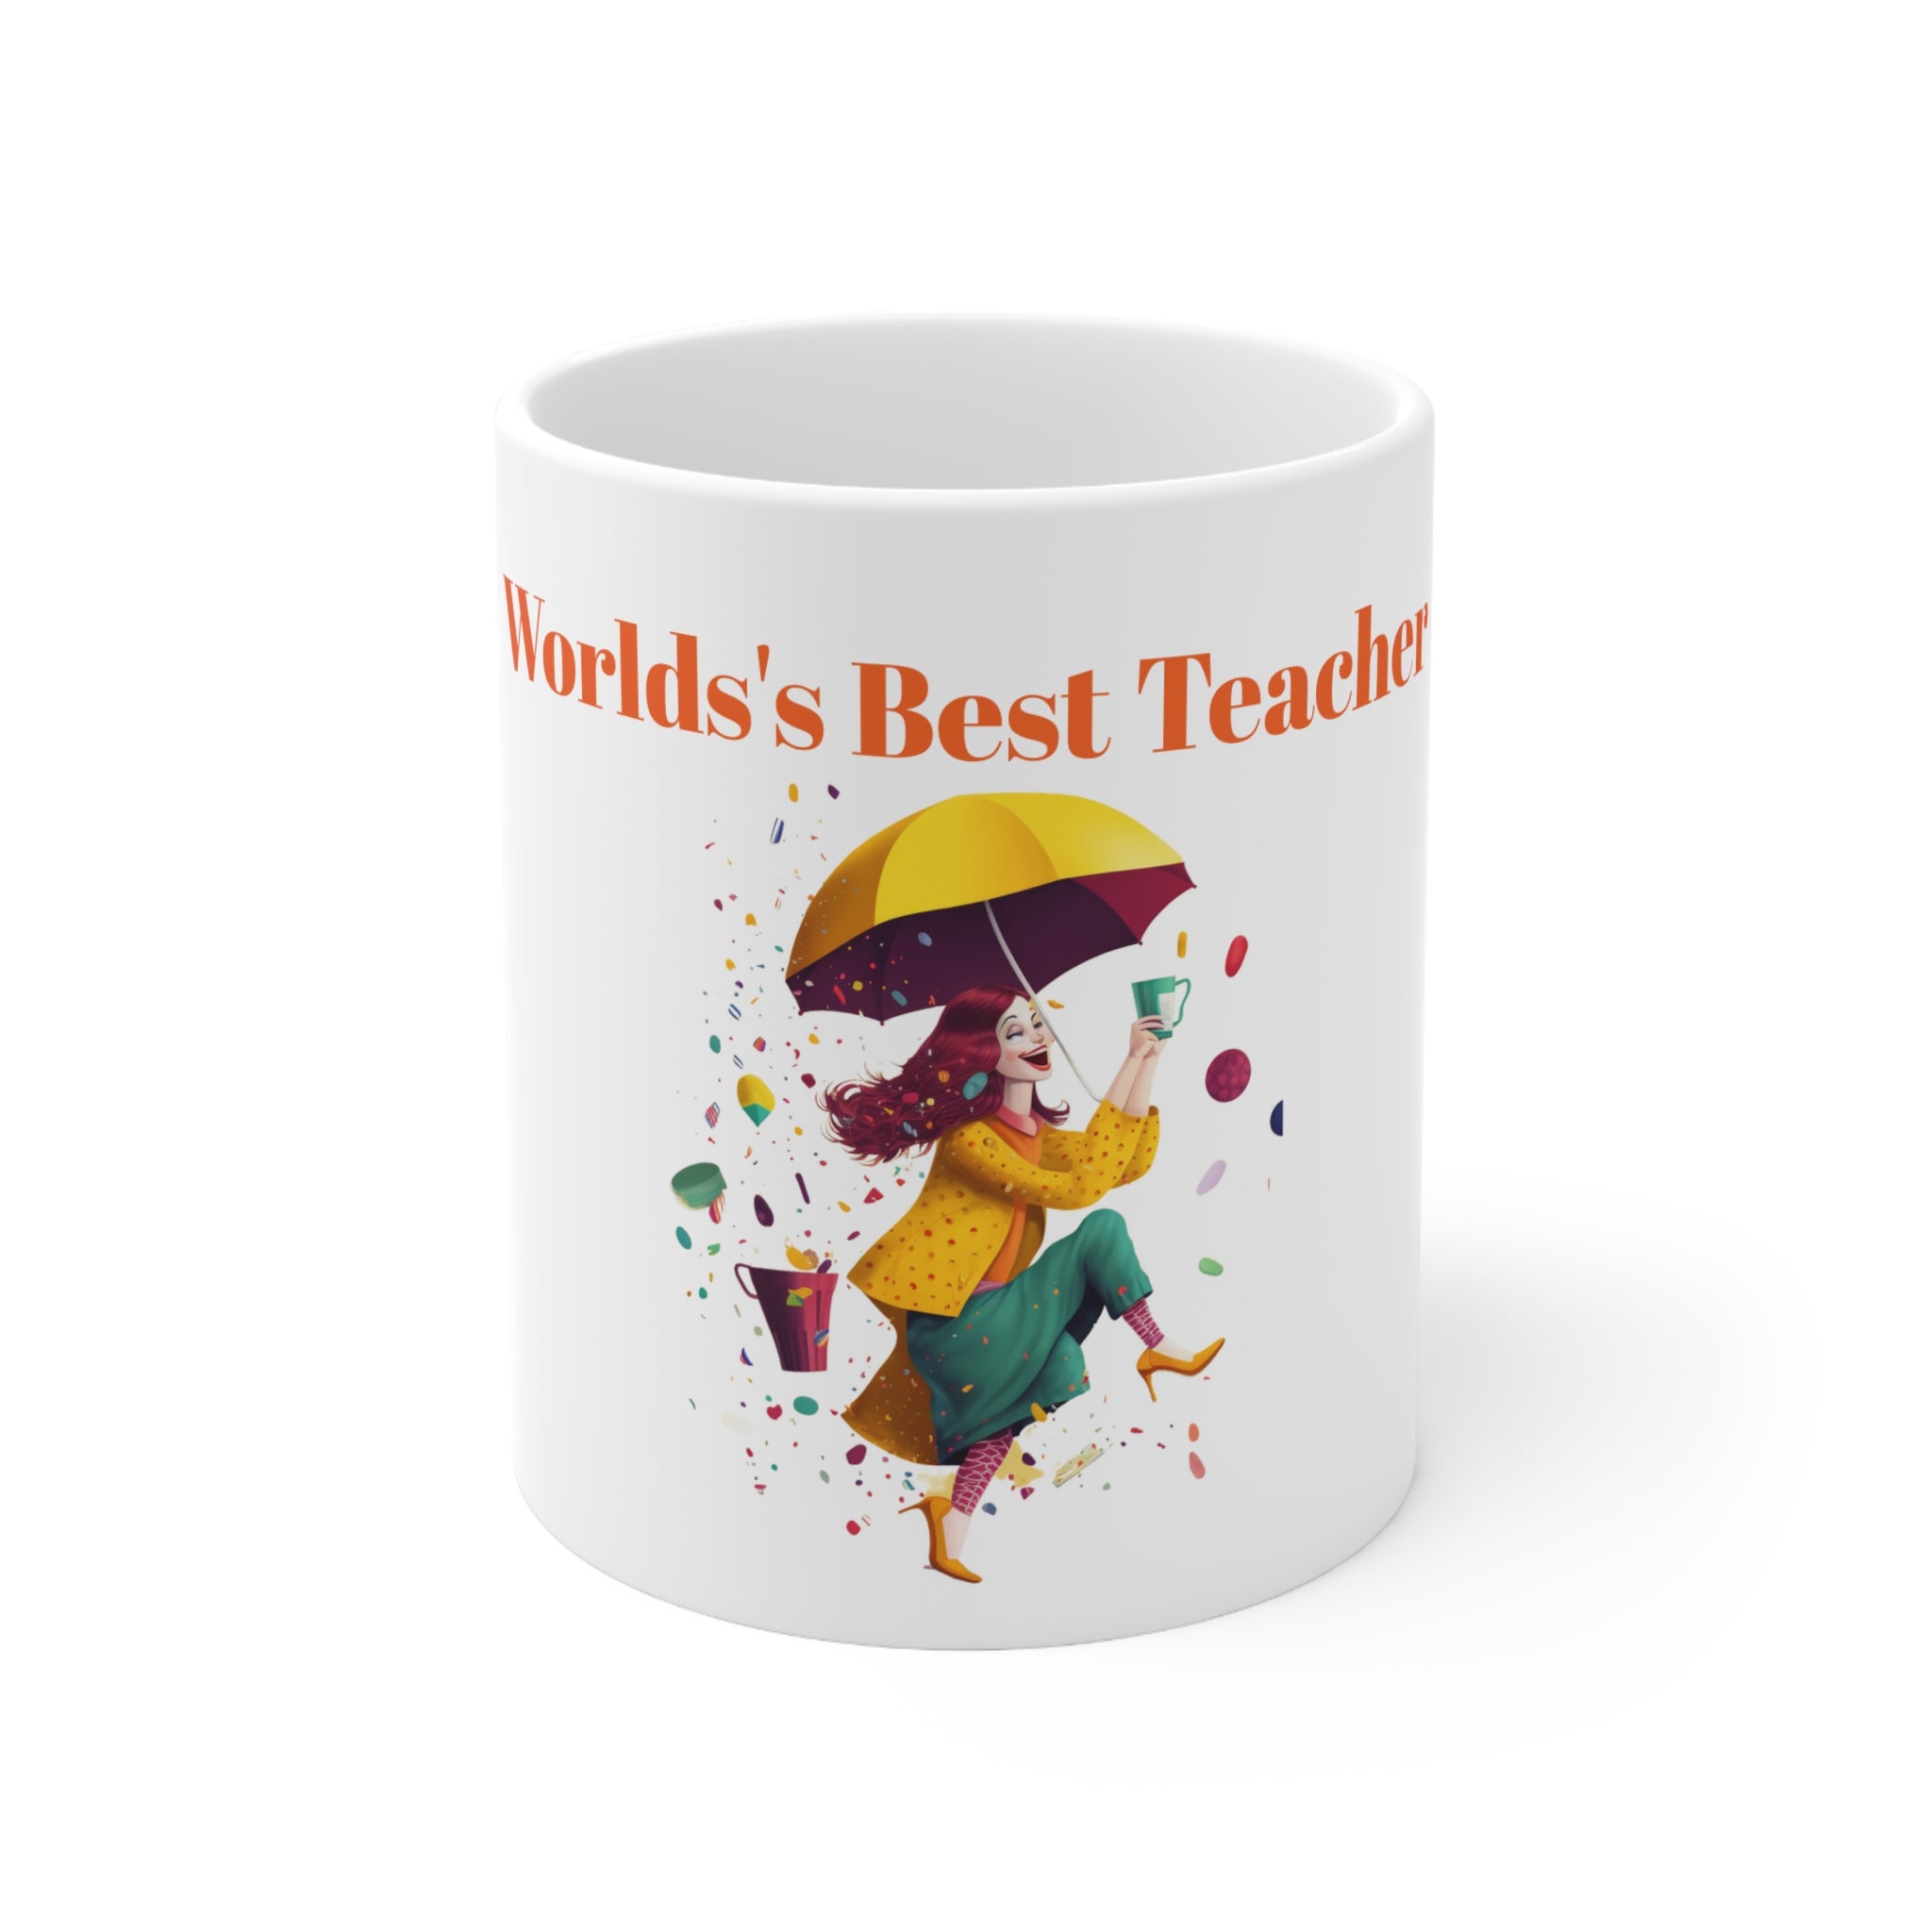 Cute Coffee Mug/ Cup With Happy Teacher With Her Cute Yellow Umbrella Celebrating a Cup of Hot Starbucks Coffee to Start the Day on a Rainy Morning.